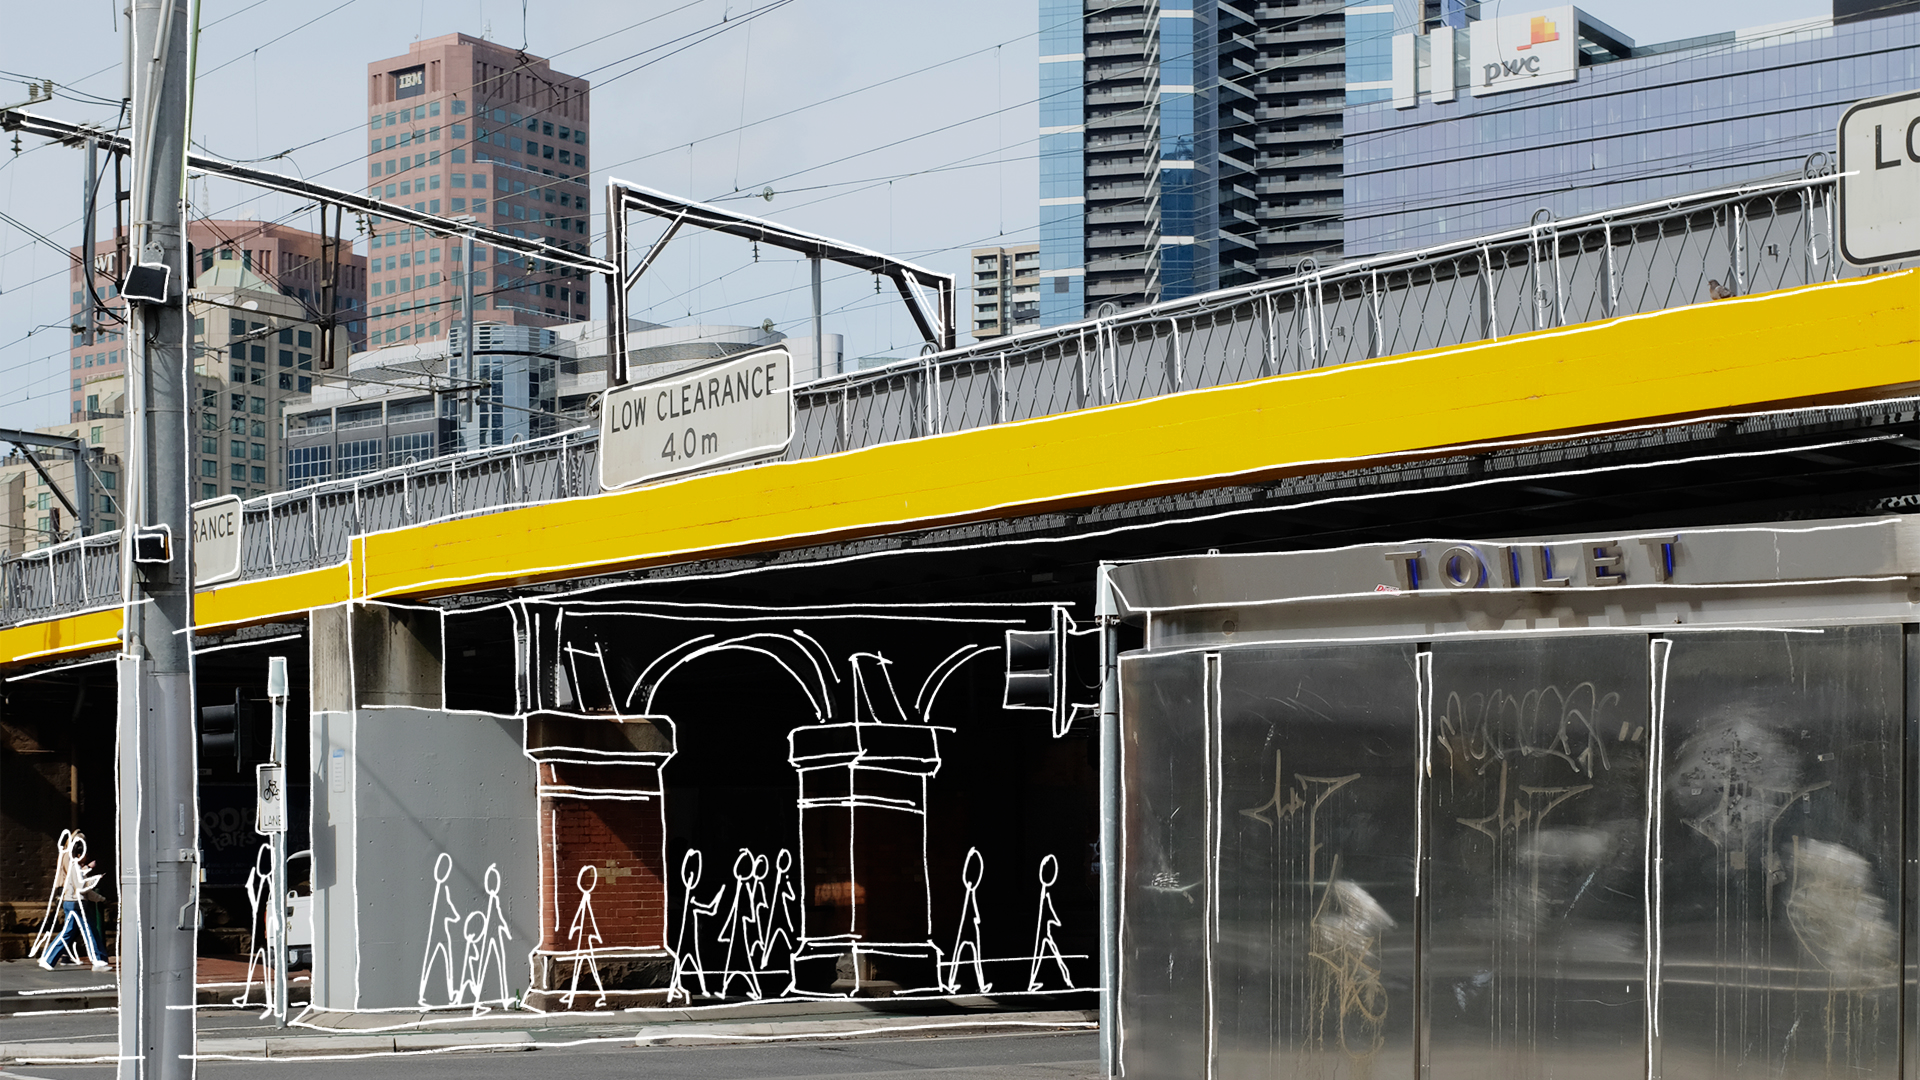 Underpass presented by Architectus at Melbourne Design Week